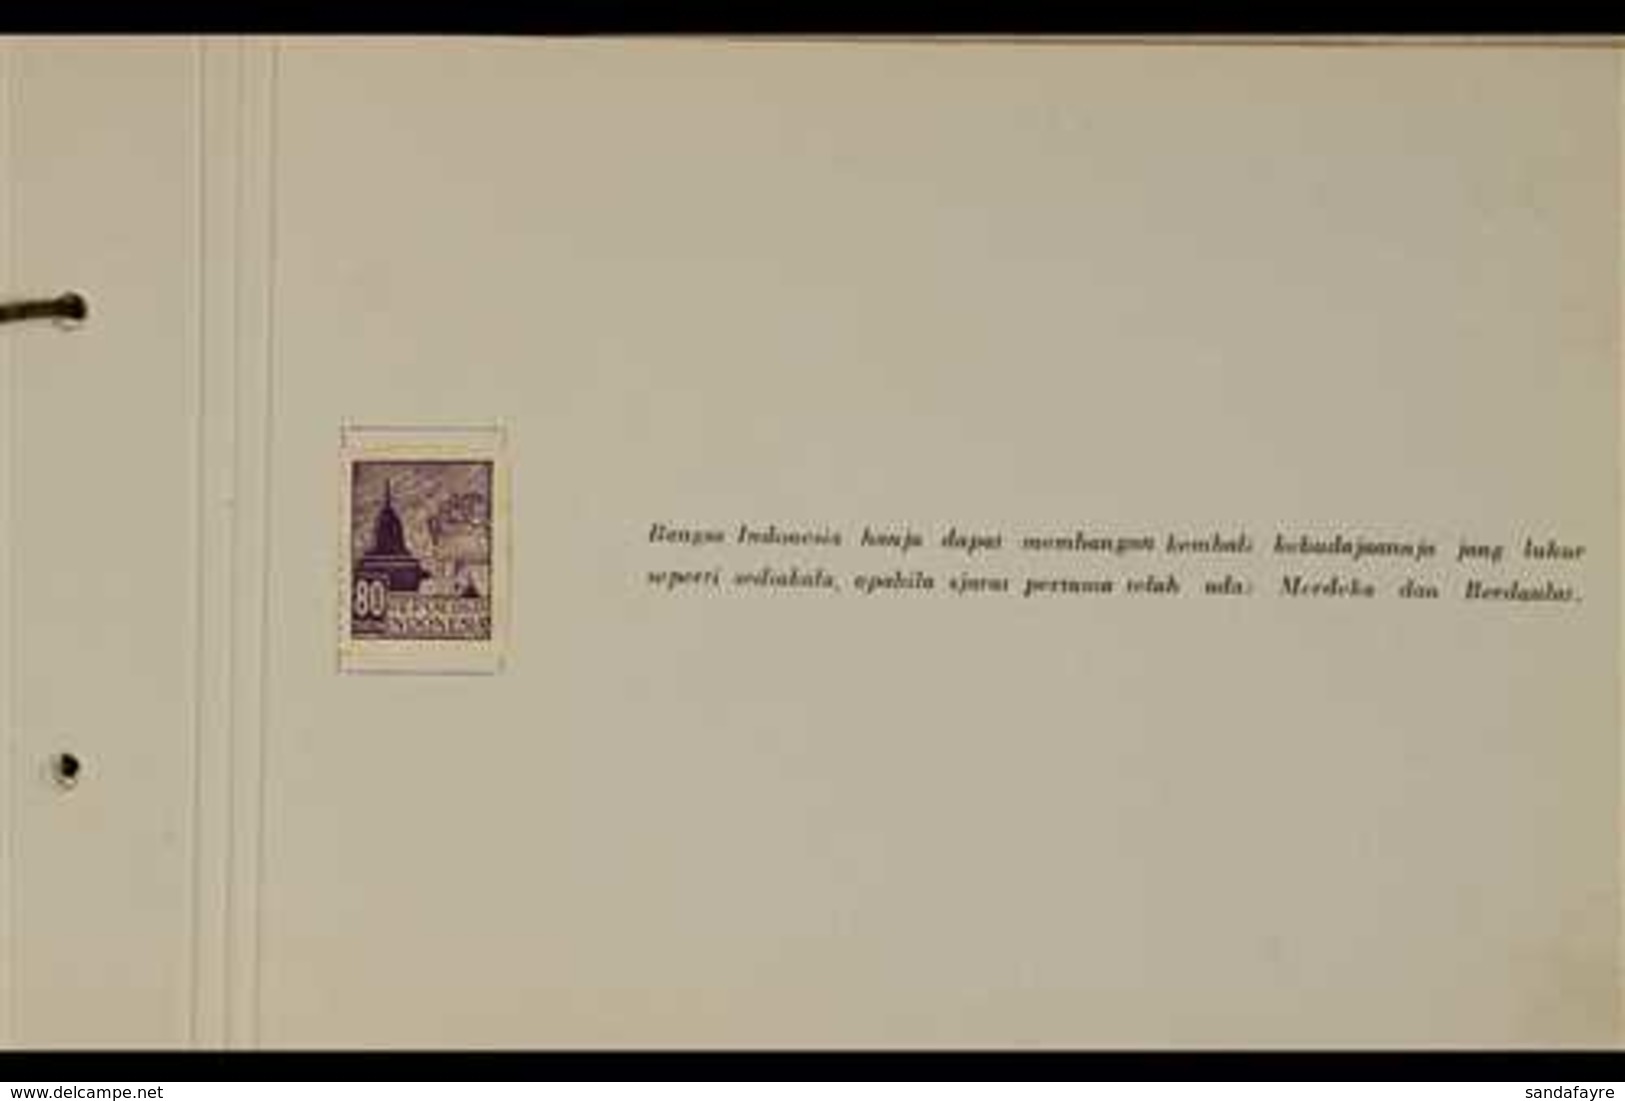 1945-1947  All Different Unused Stamps And Postal Stationery Cards In A Special Presentation Album Handstamped "With The - Indonesië